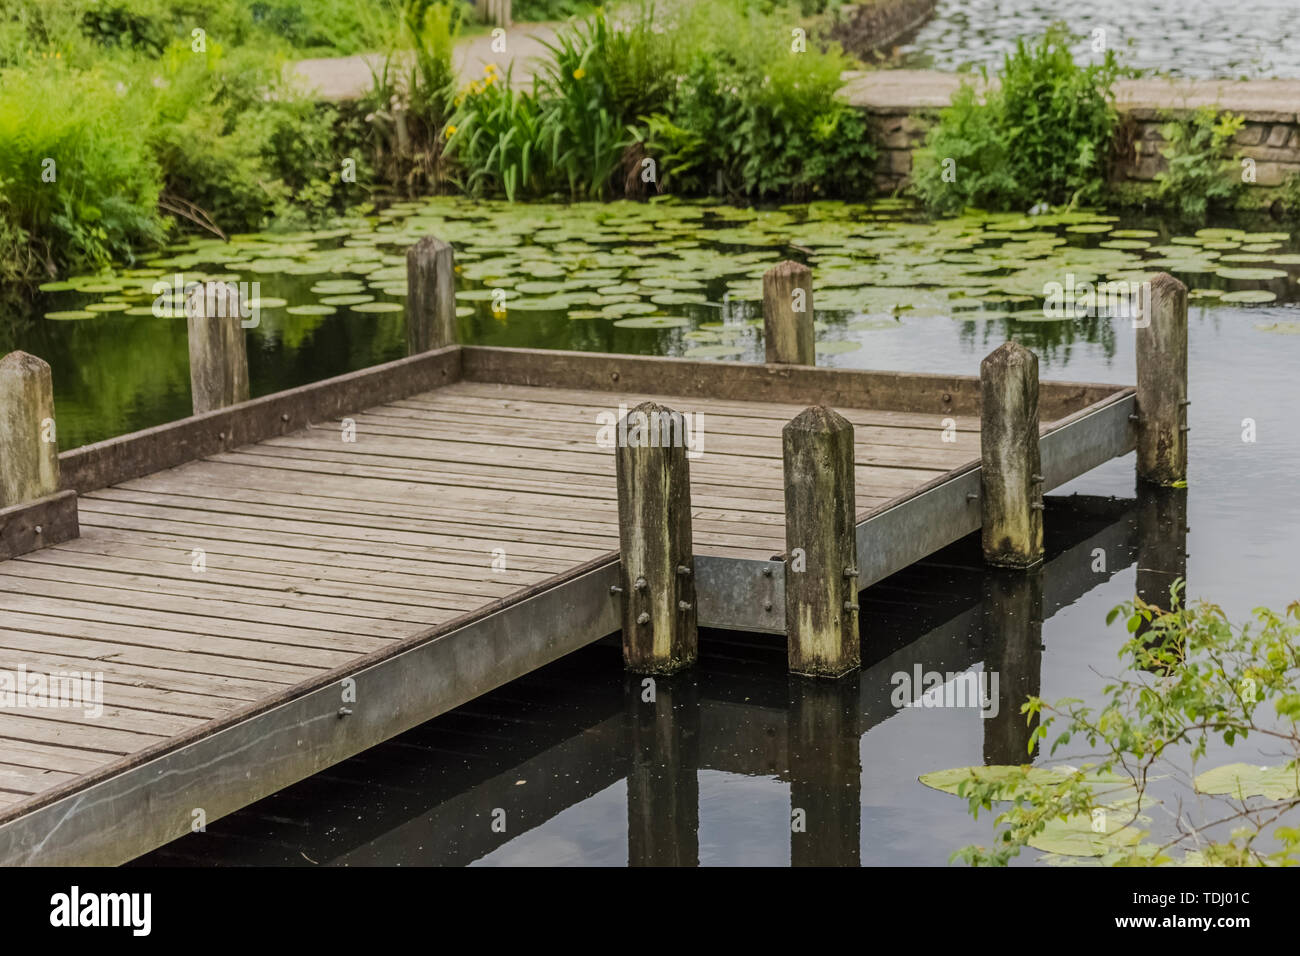 Lovely wooden pier resting in a pond with water lilies in the background invoking feelings of calmness and stillness Stock Photo